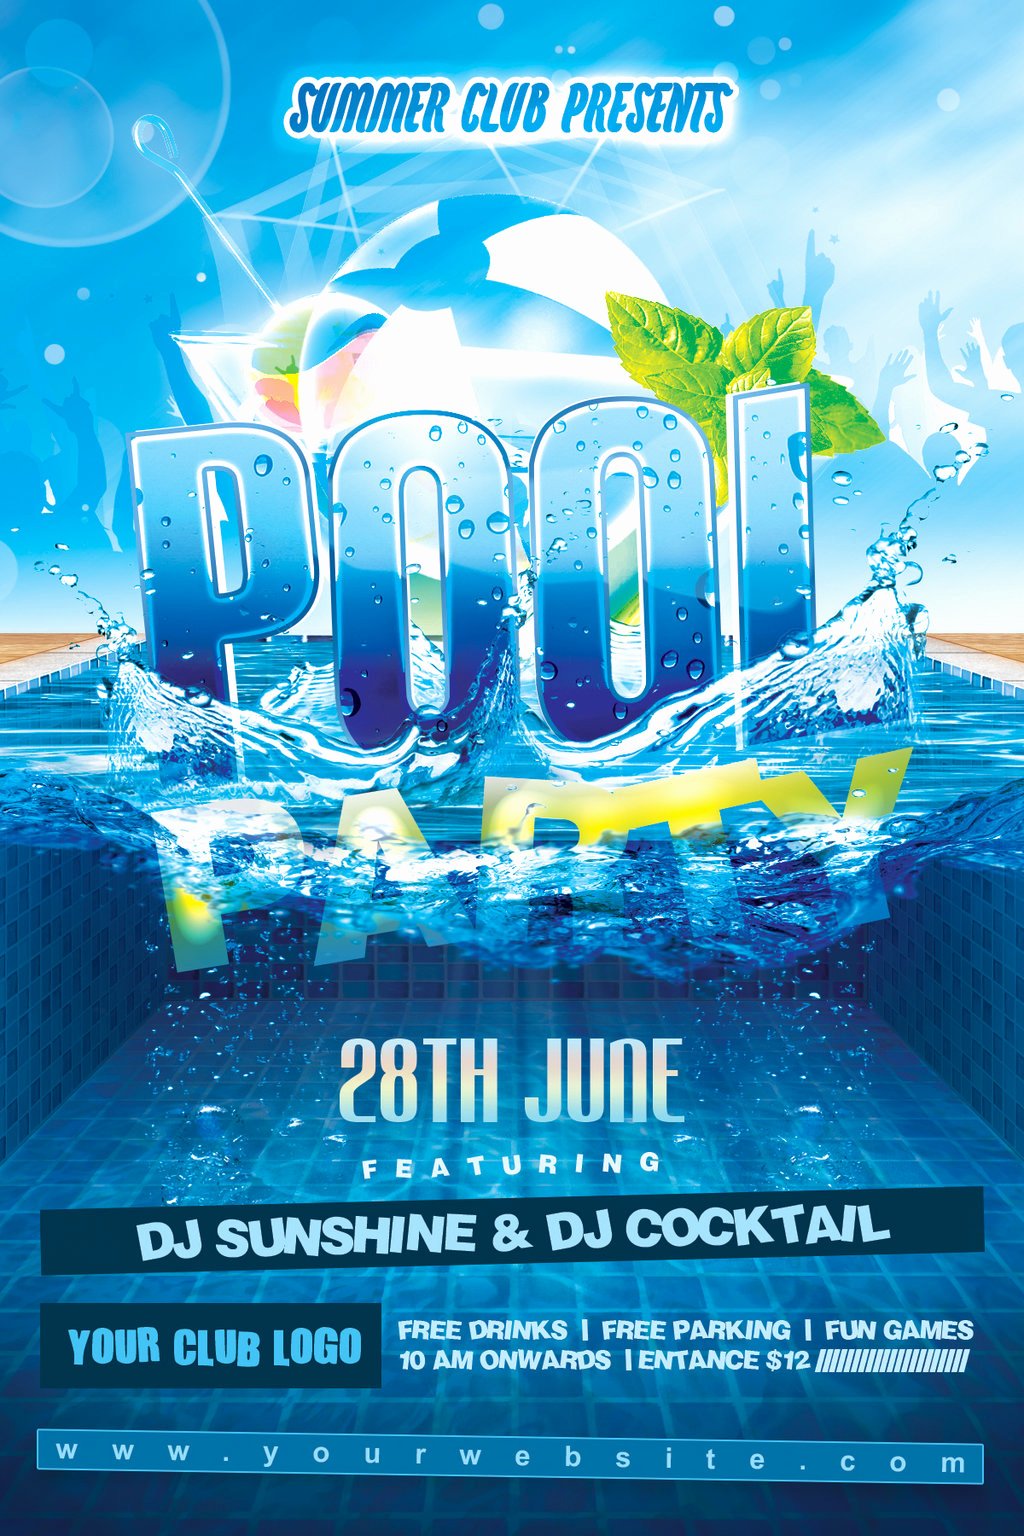 Pool Party Flyers Templates Beautiful Summer Pool Party Flyer by Dilanr On Deviantart